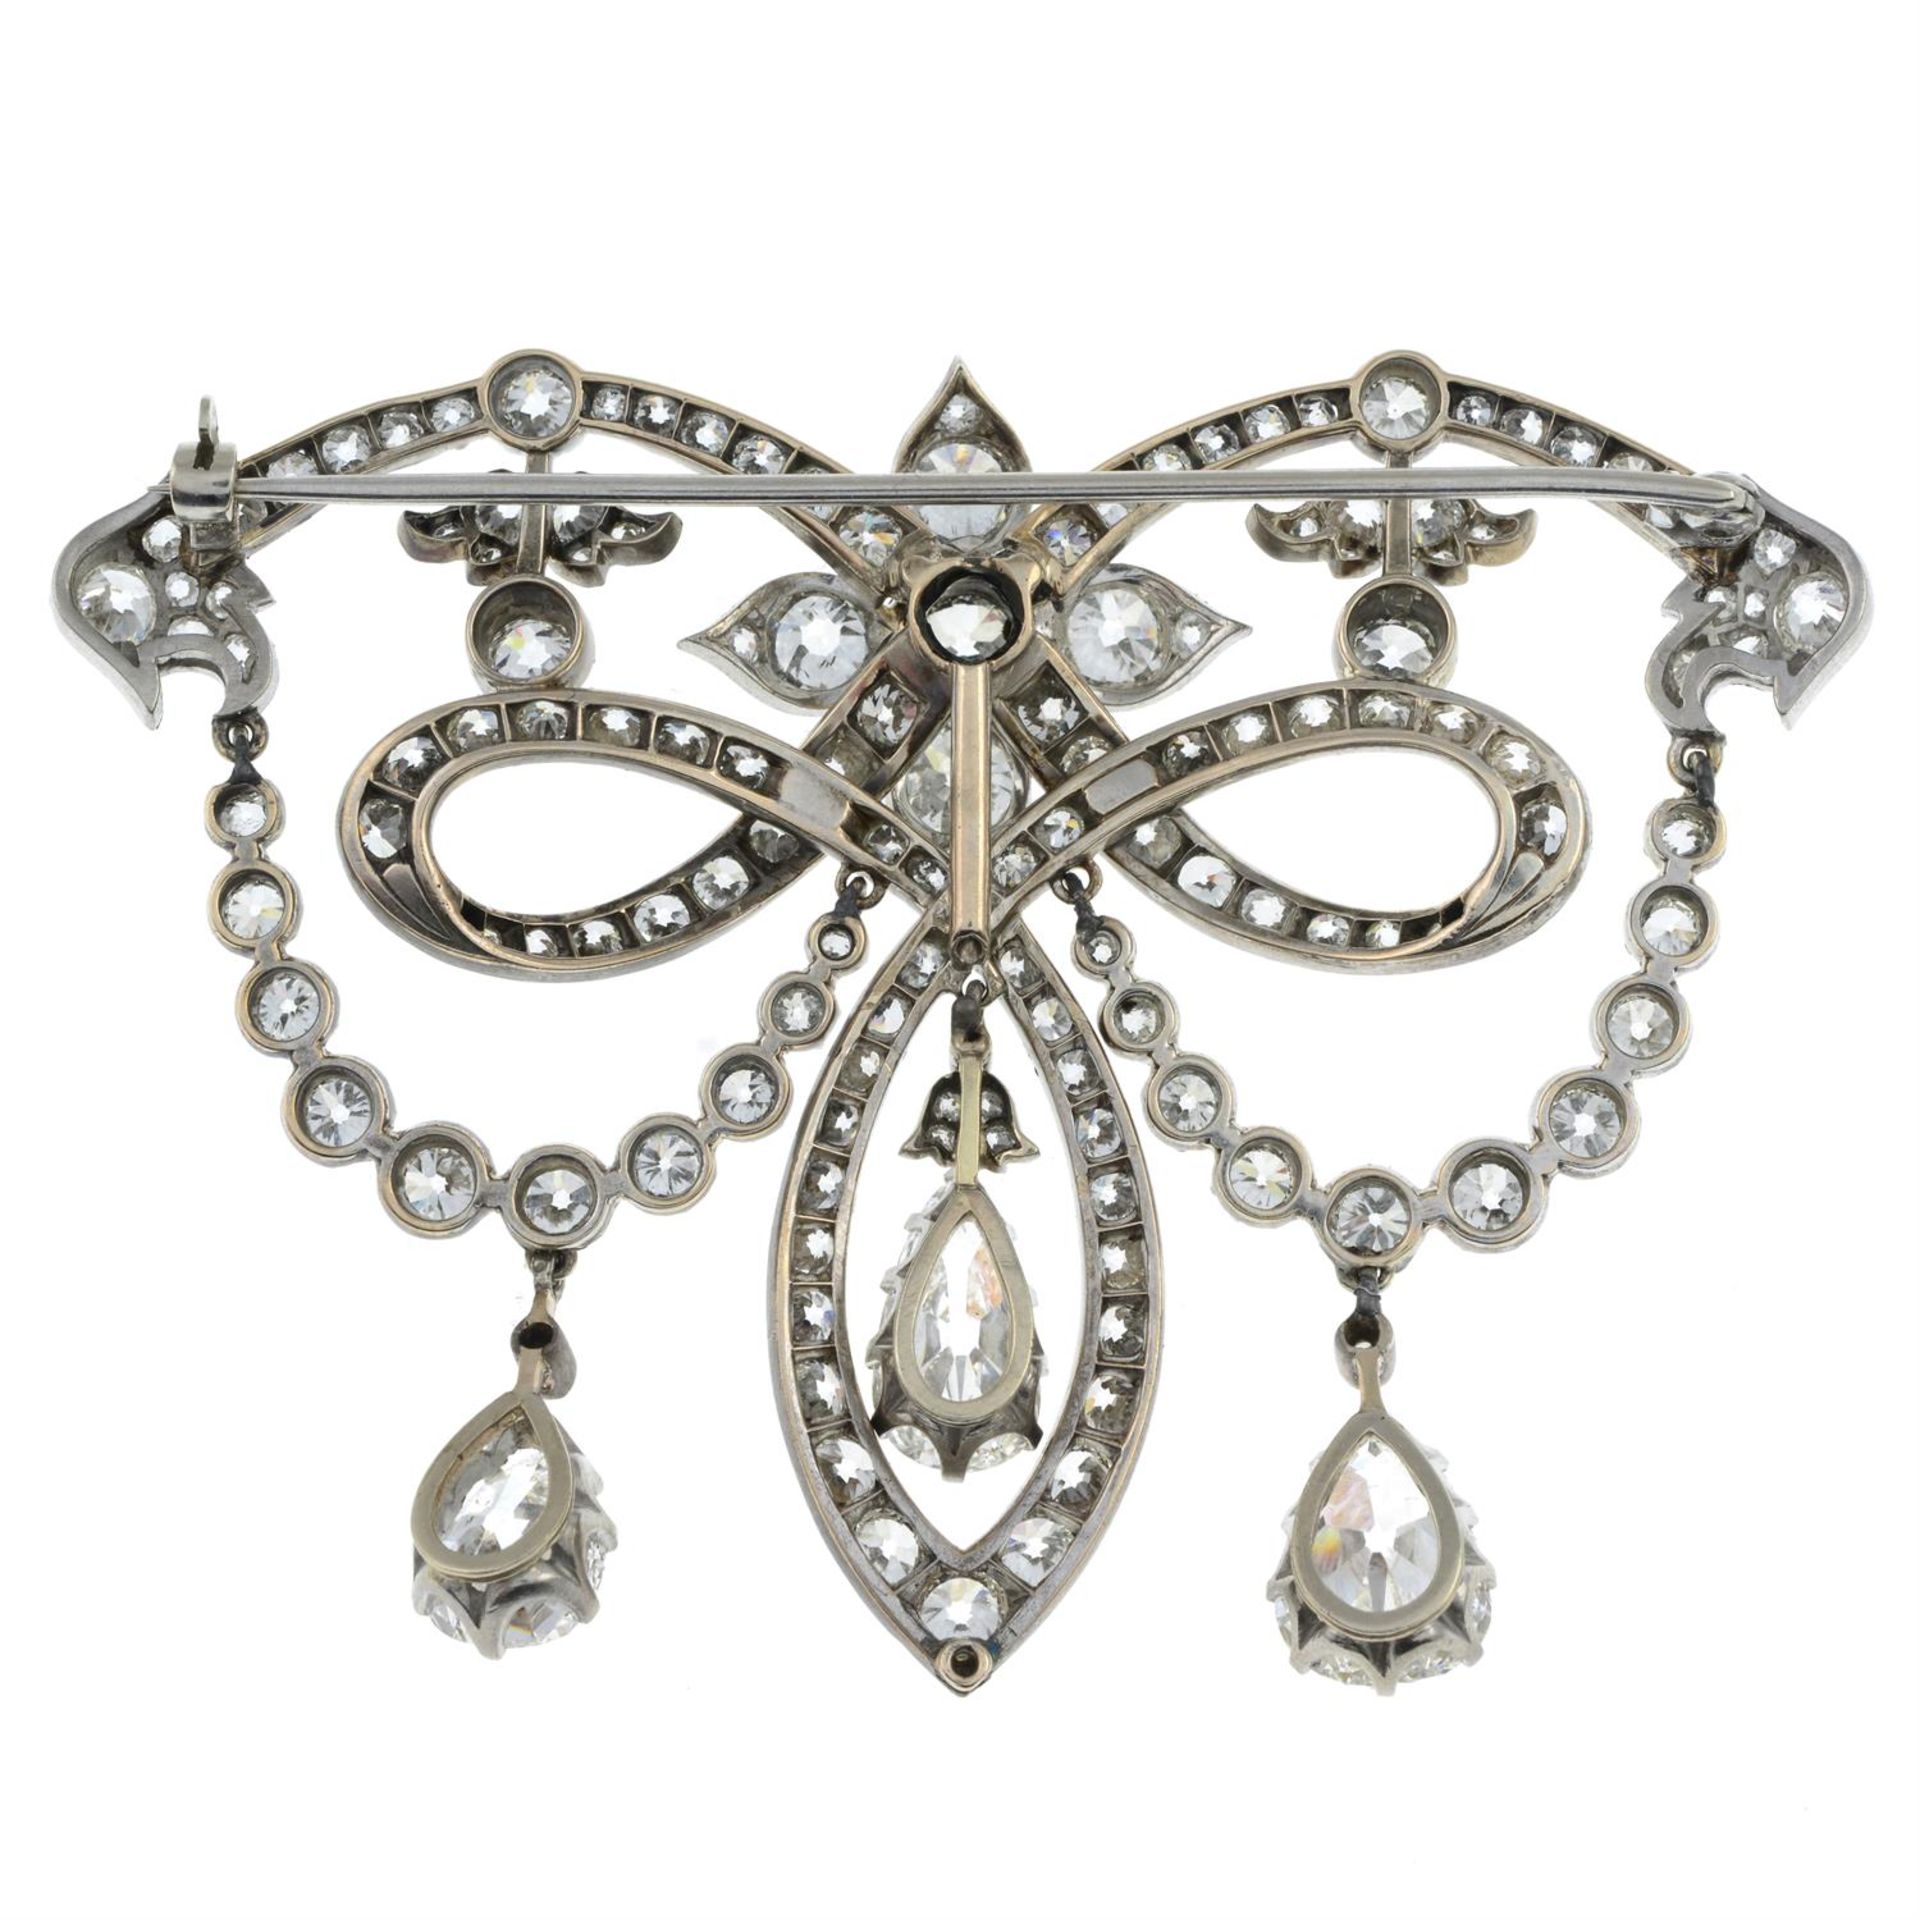 19th century silver and gold diamond brooch - Image 3 of 7